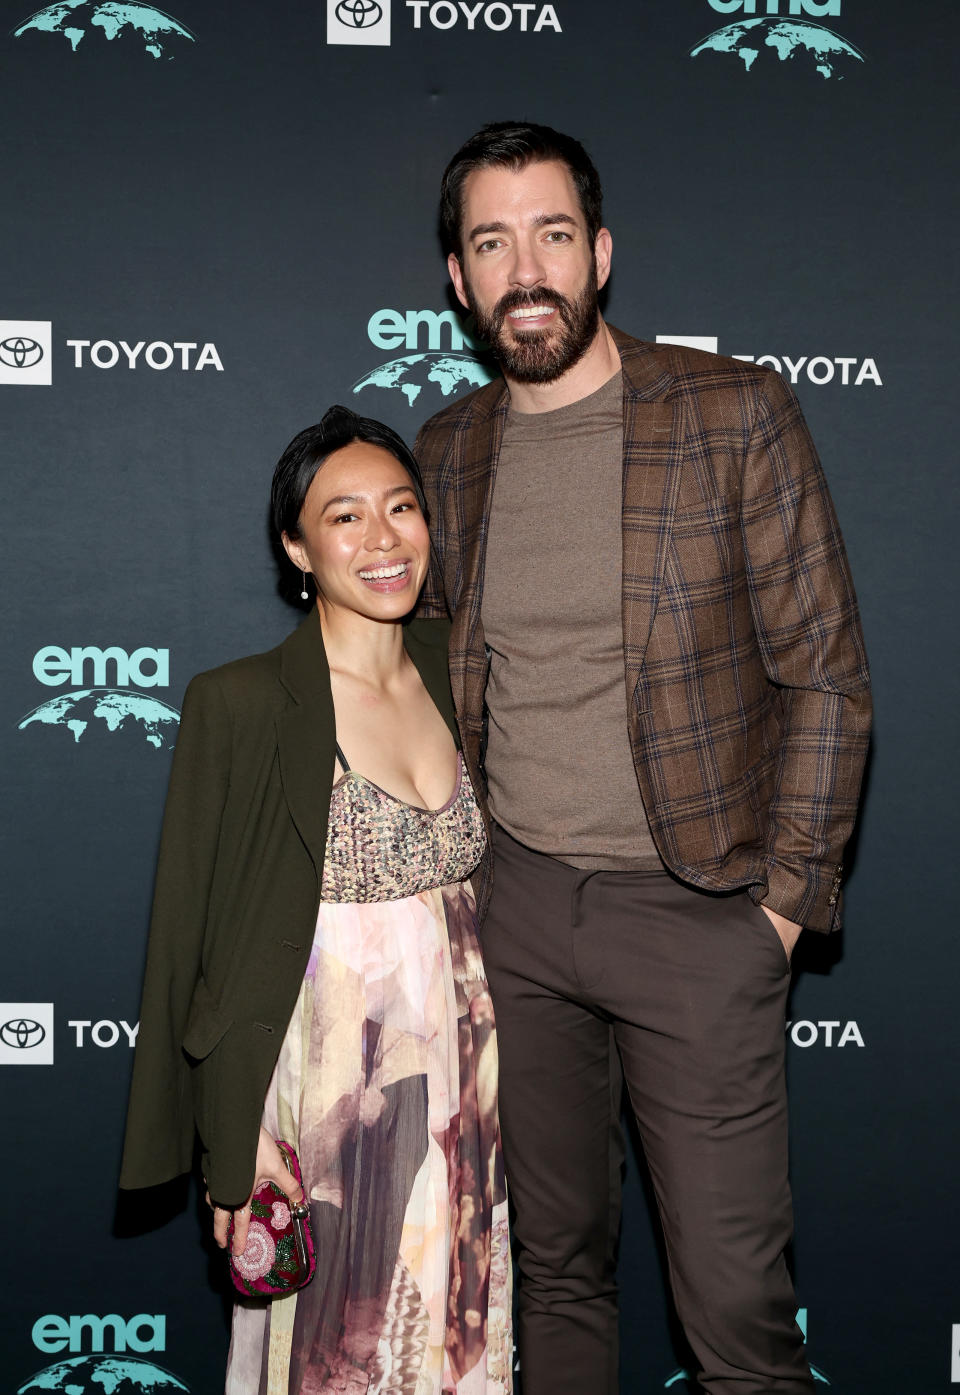 WEST HOLLYWOOD, CALIFORNIA - MARCH 14: (L-R) Linda Phan and Drew Scott attend the Environmental Media Association IMPACT Summit VIP Dinner, Sponsored By Toyota at Pendry West Hollywood on March 14, 2023 in West Hollywood, California. (Photo by Amy Sussman/The Hollywood Reporter via Getty Images)